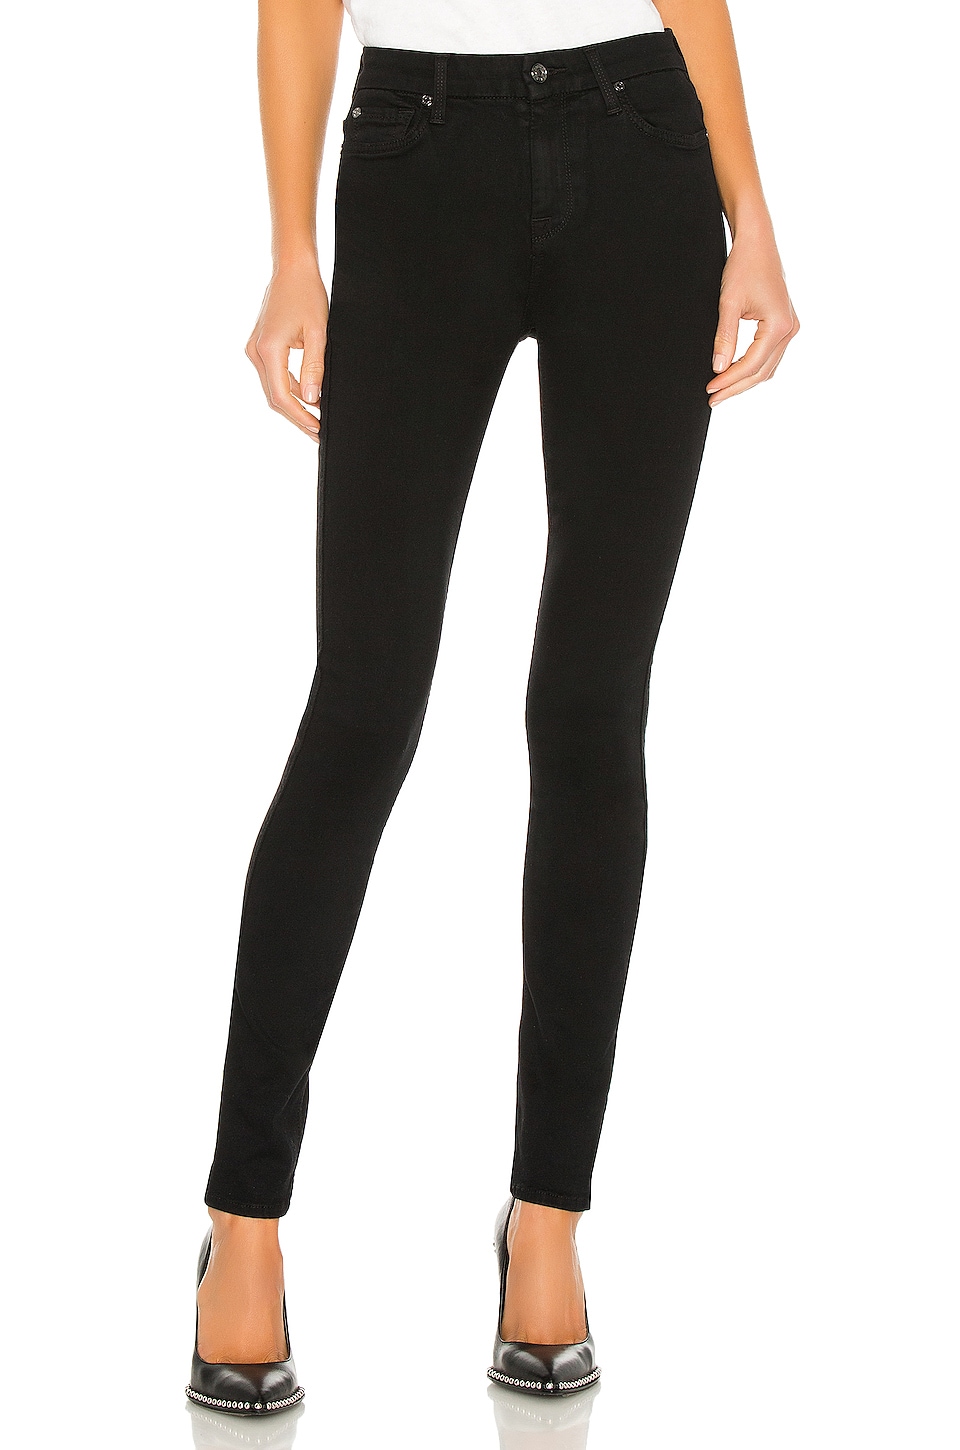 7 For All Mankind The High Waist Skinny 